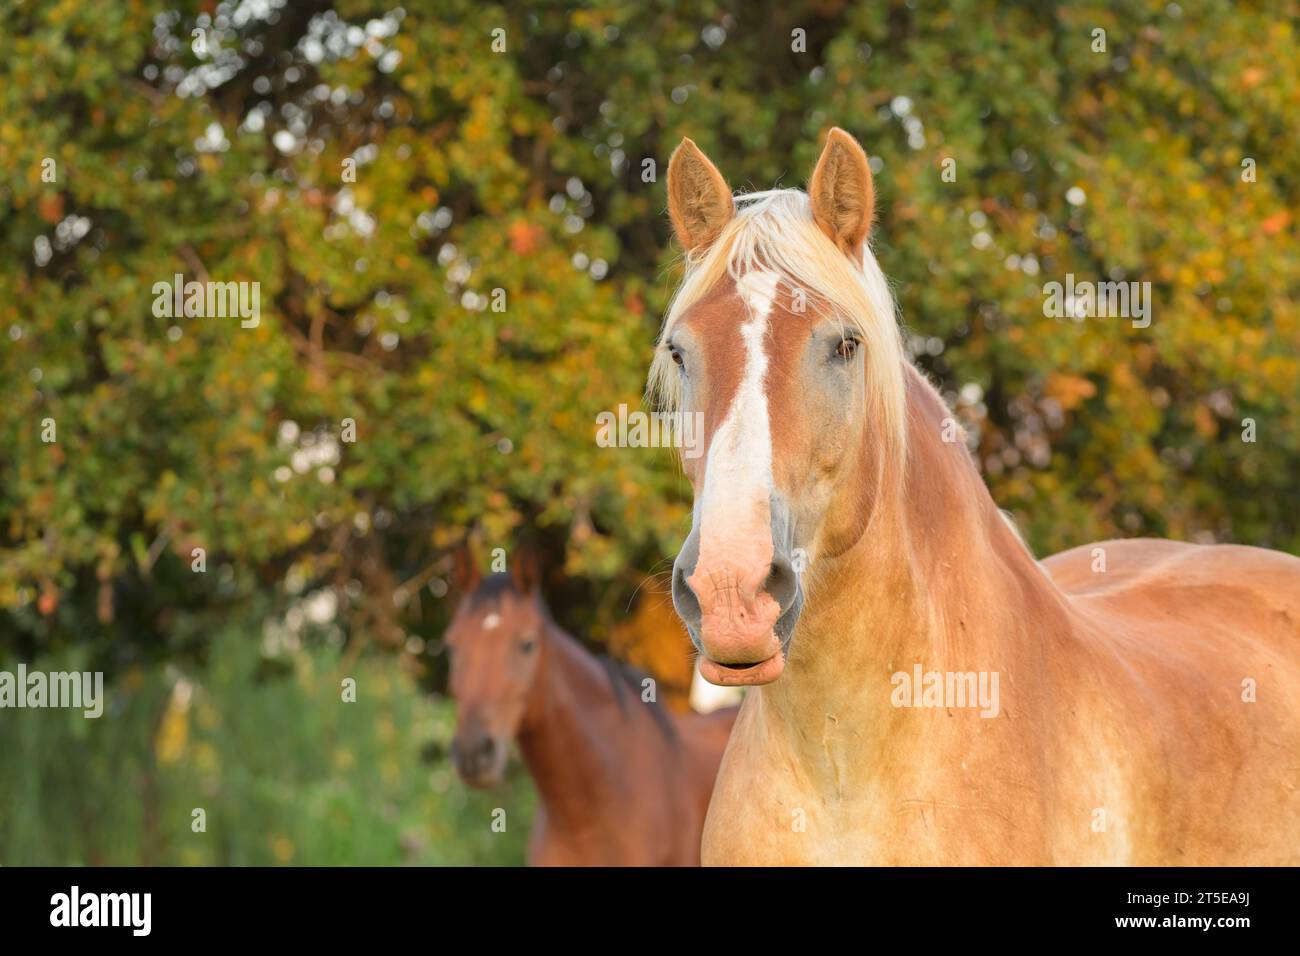 Blond Belgian draft horse looking past viewer with his ears pricked up in early morning light, with another horse on the background Stock Photo